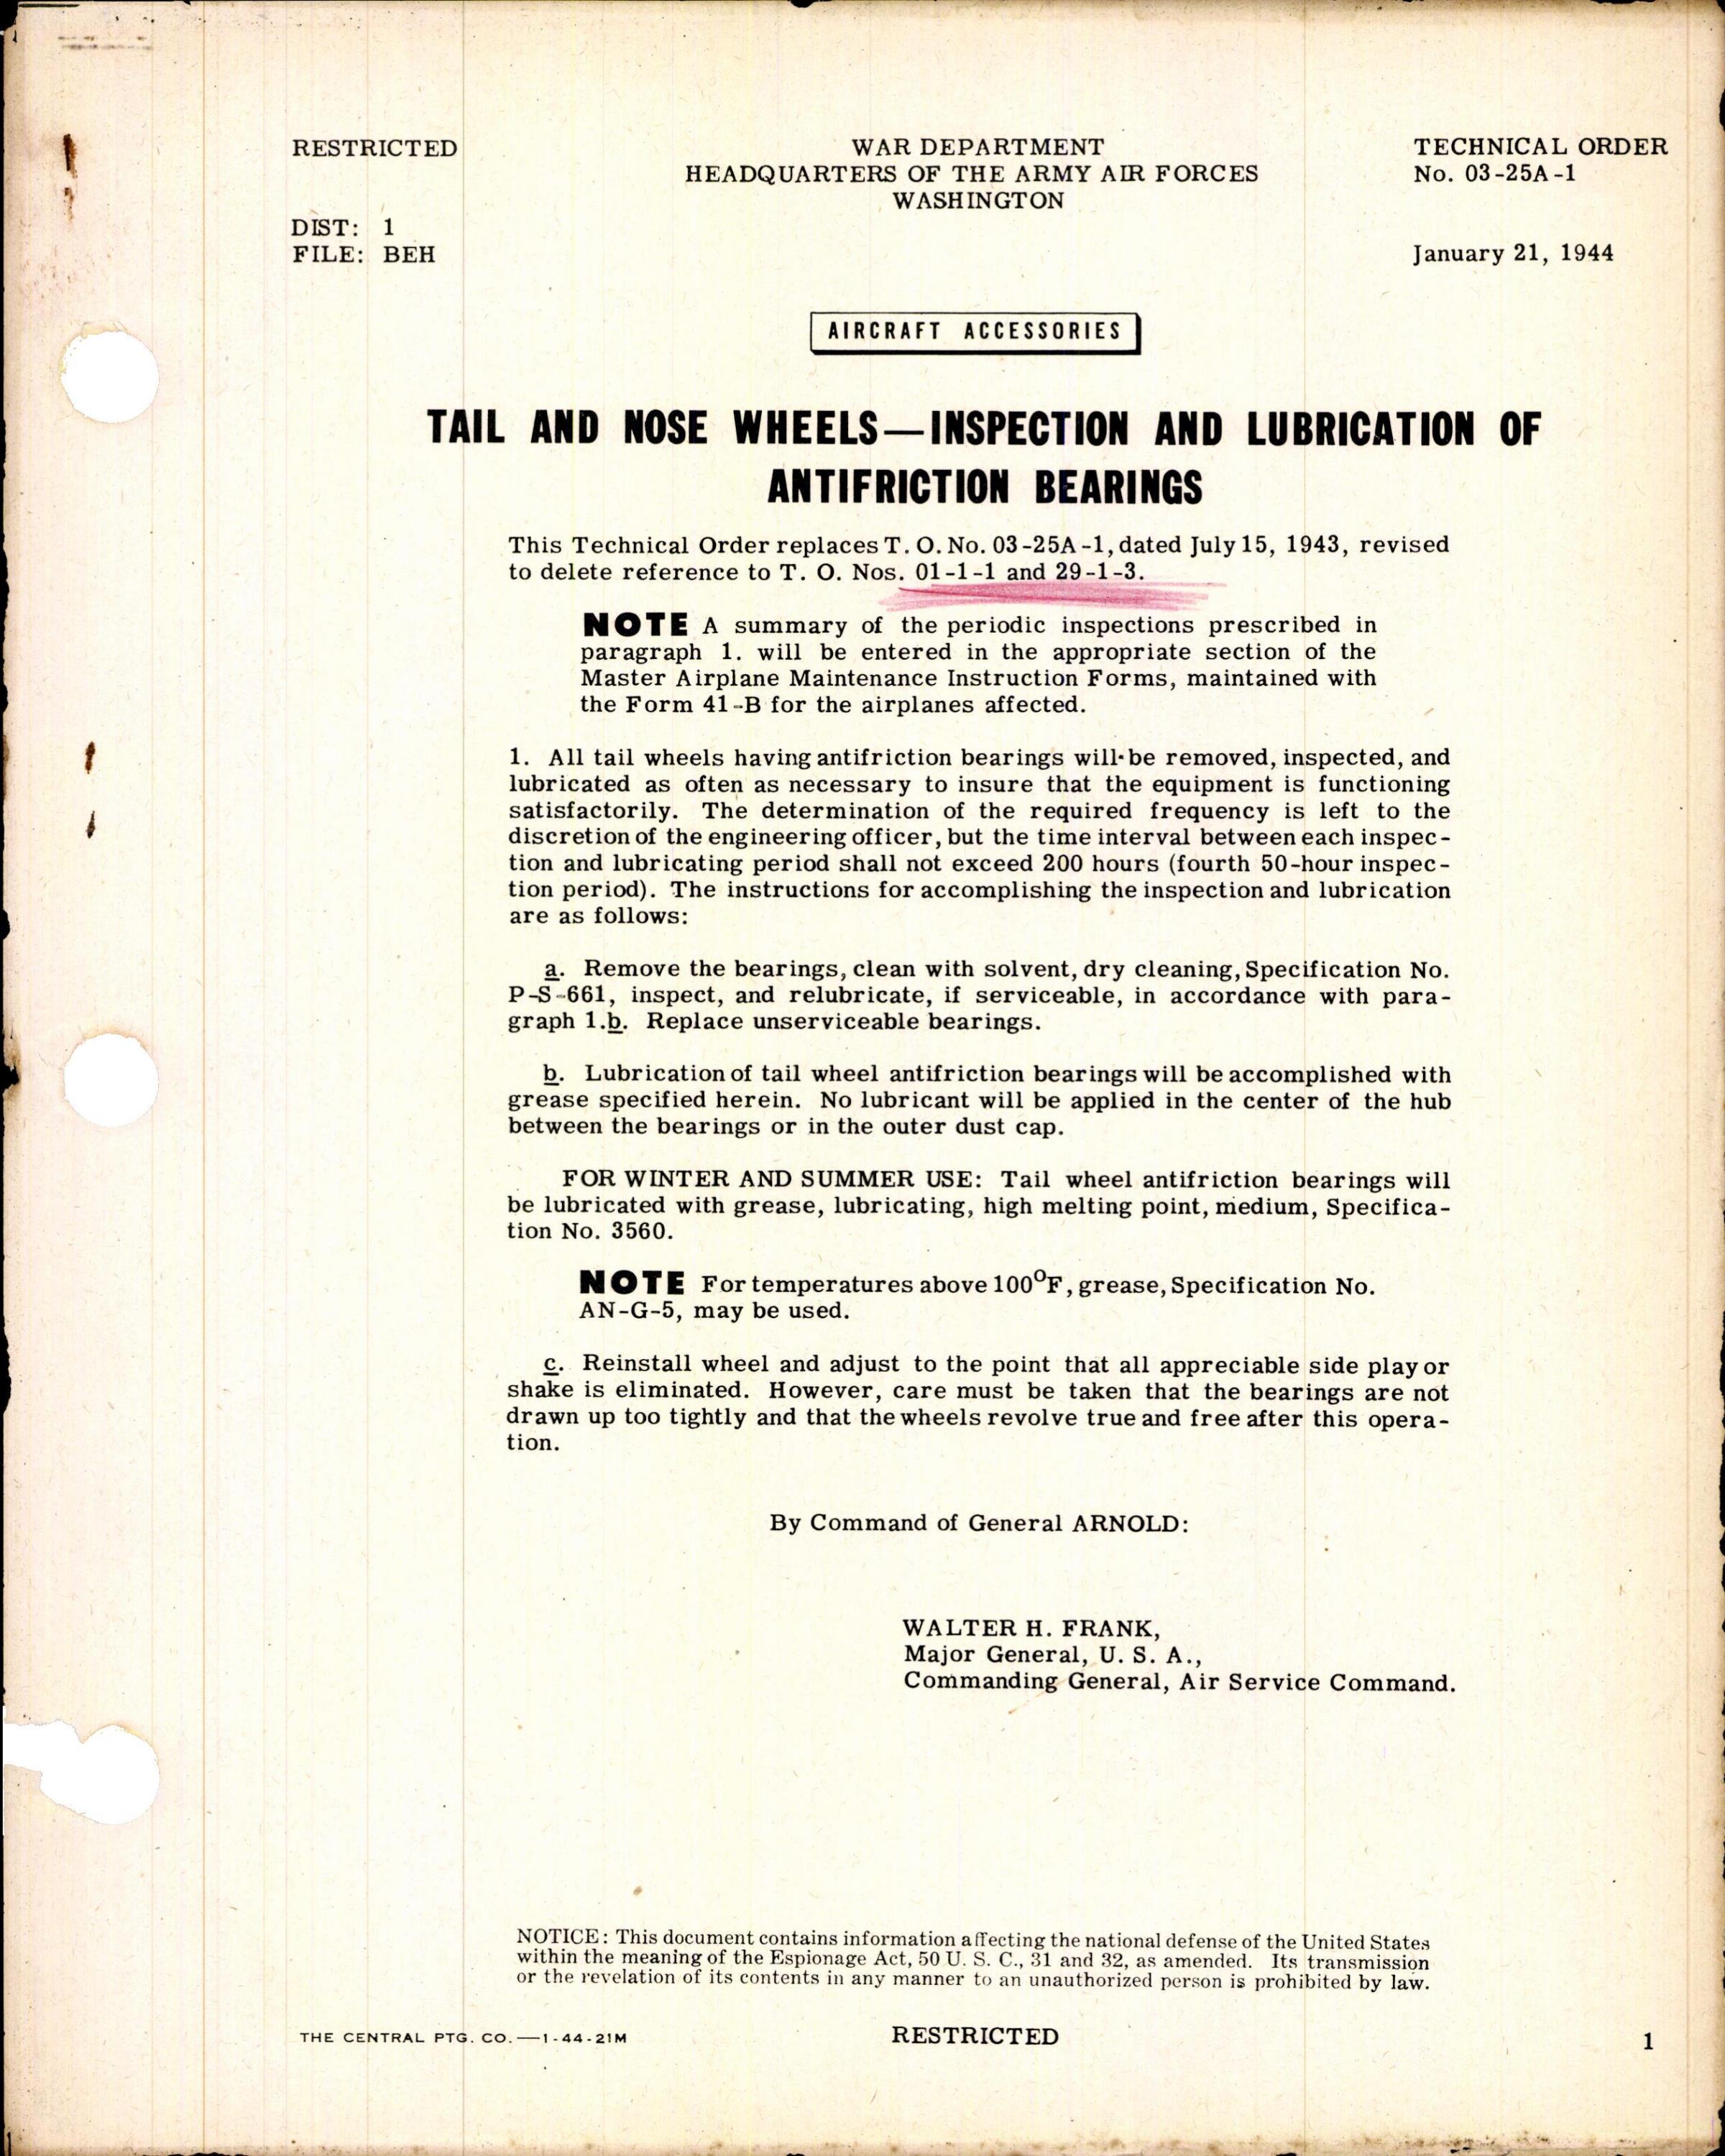 Sample page 1 from AirCorps Library document: Inspection and Lubrication of Antifriction Bearings